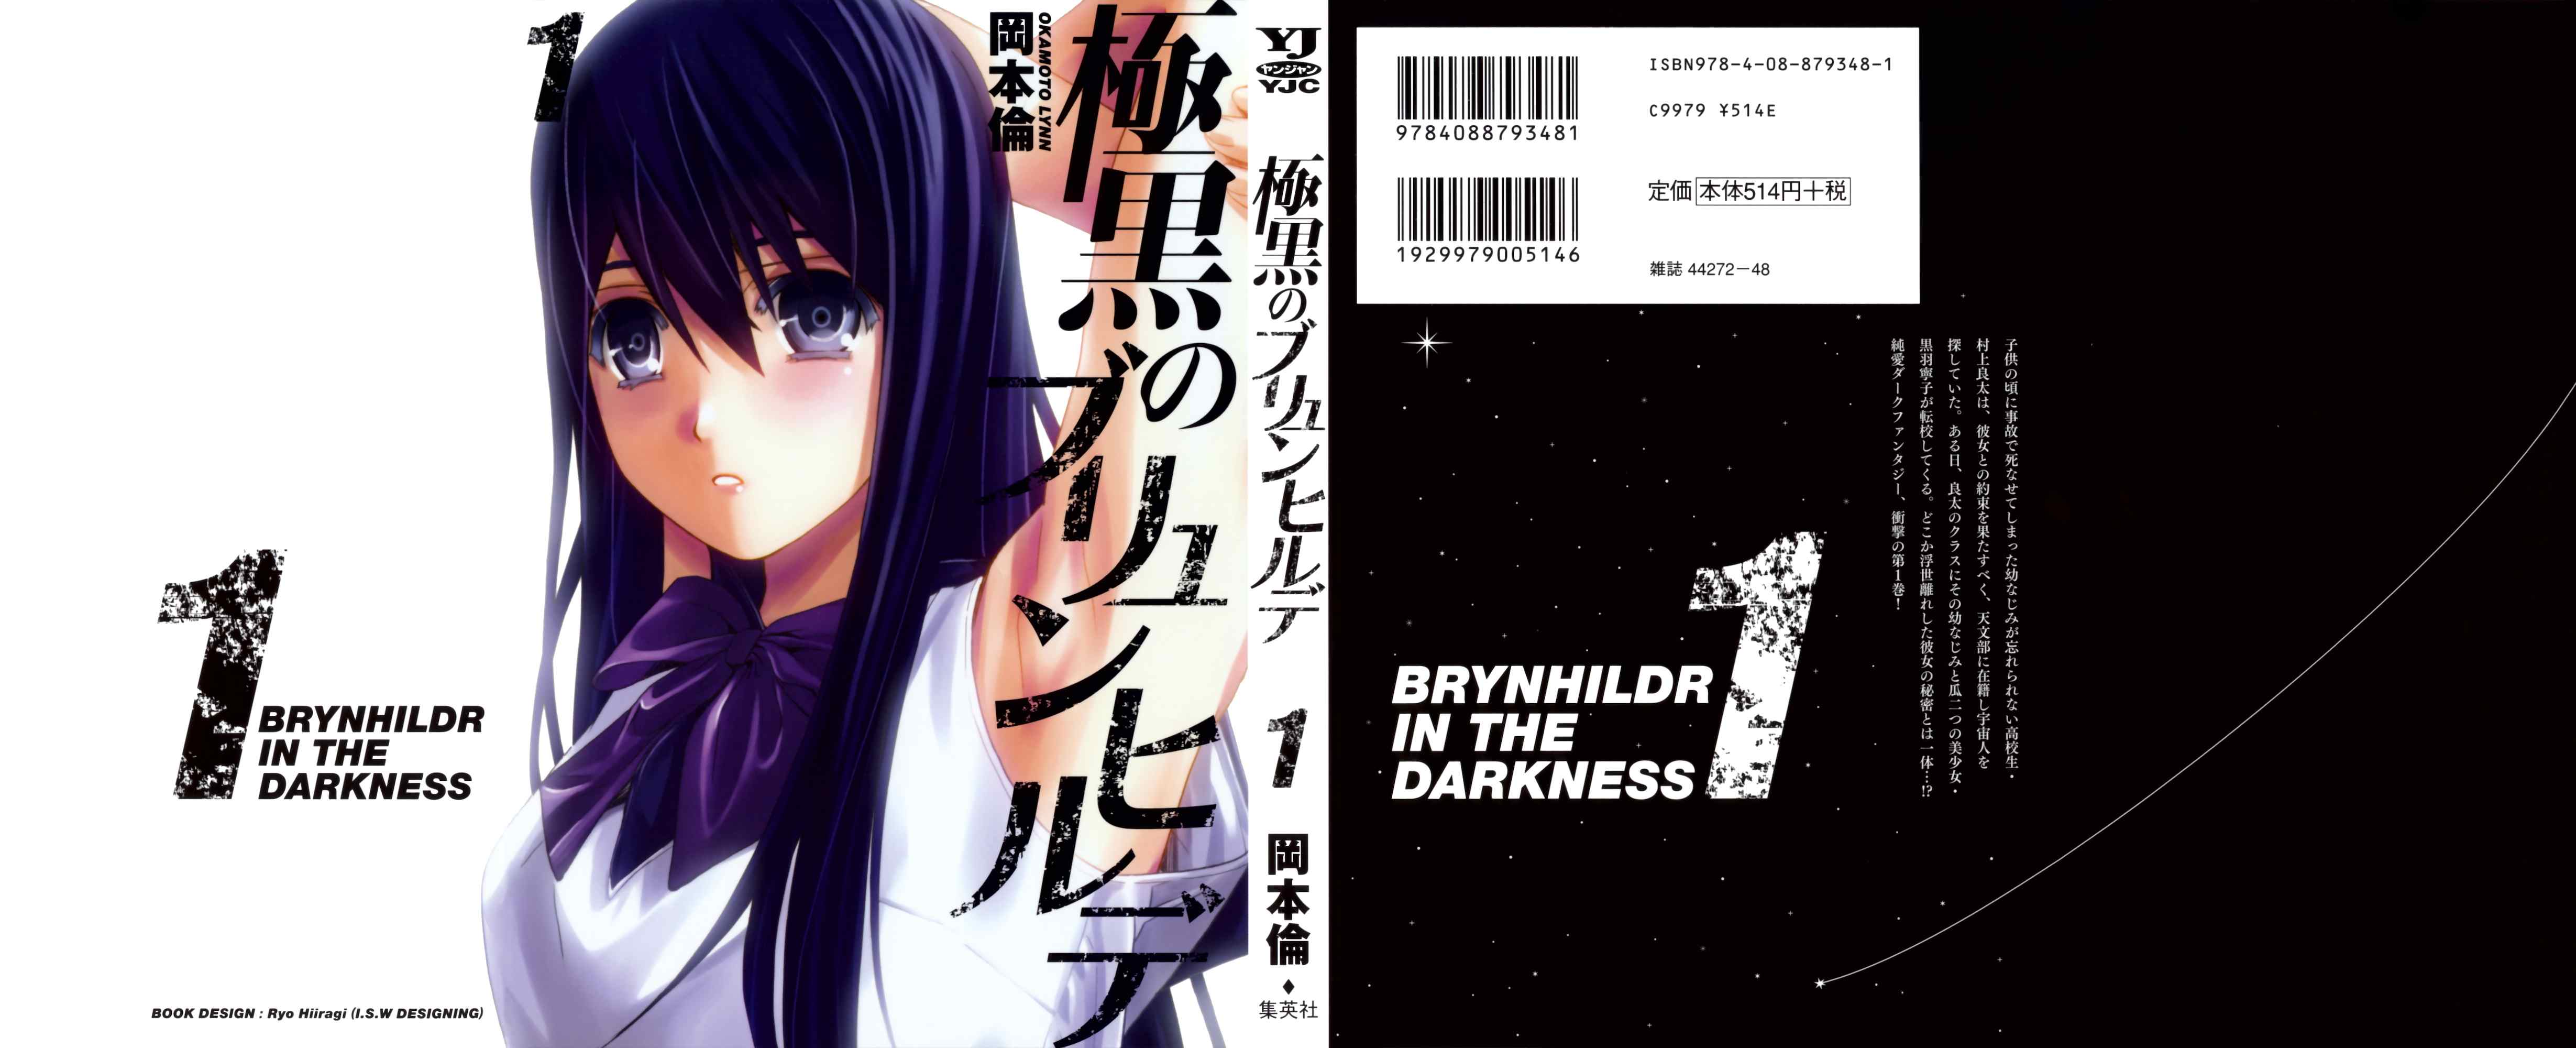 Read Manga Online for Free - Gokukoku no Brynhildr - Chapter 001 - Page 1. 